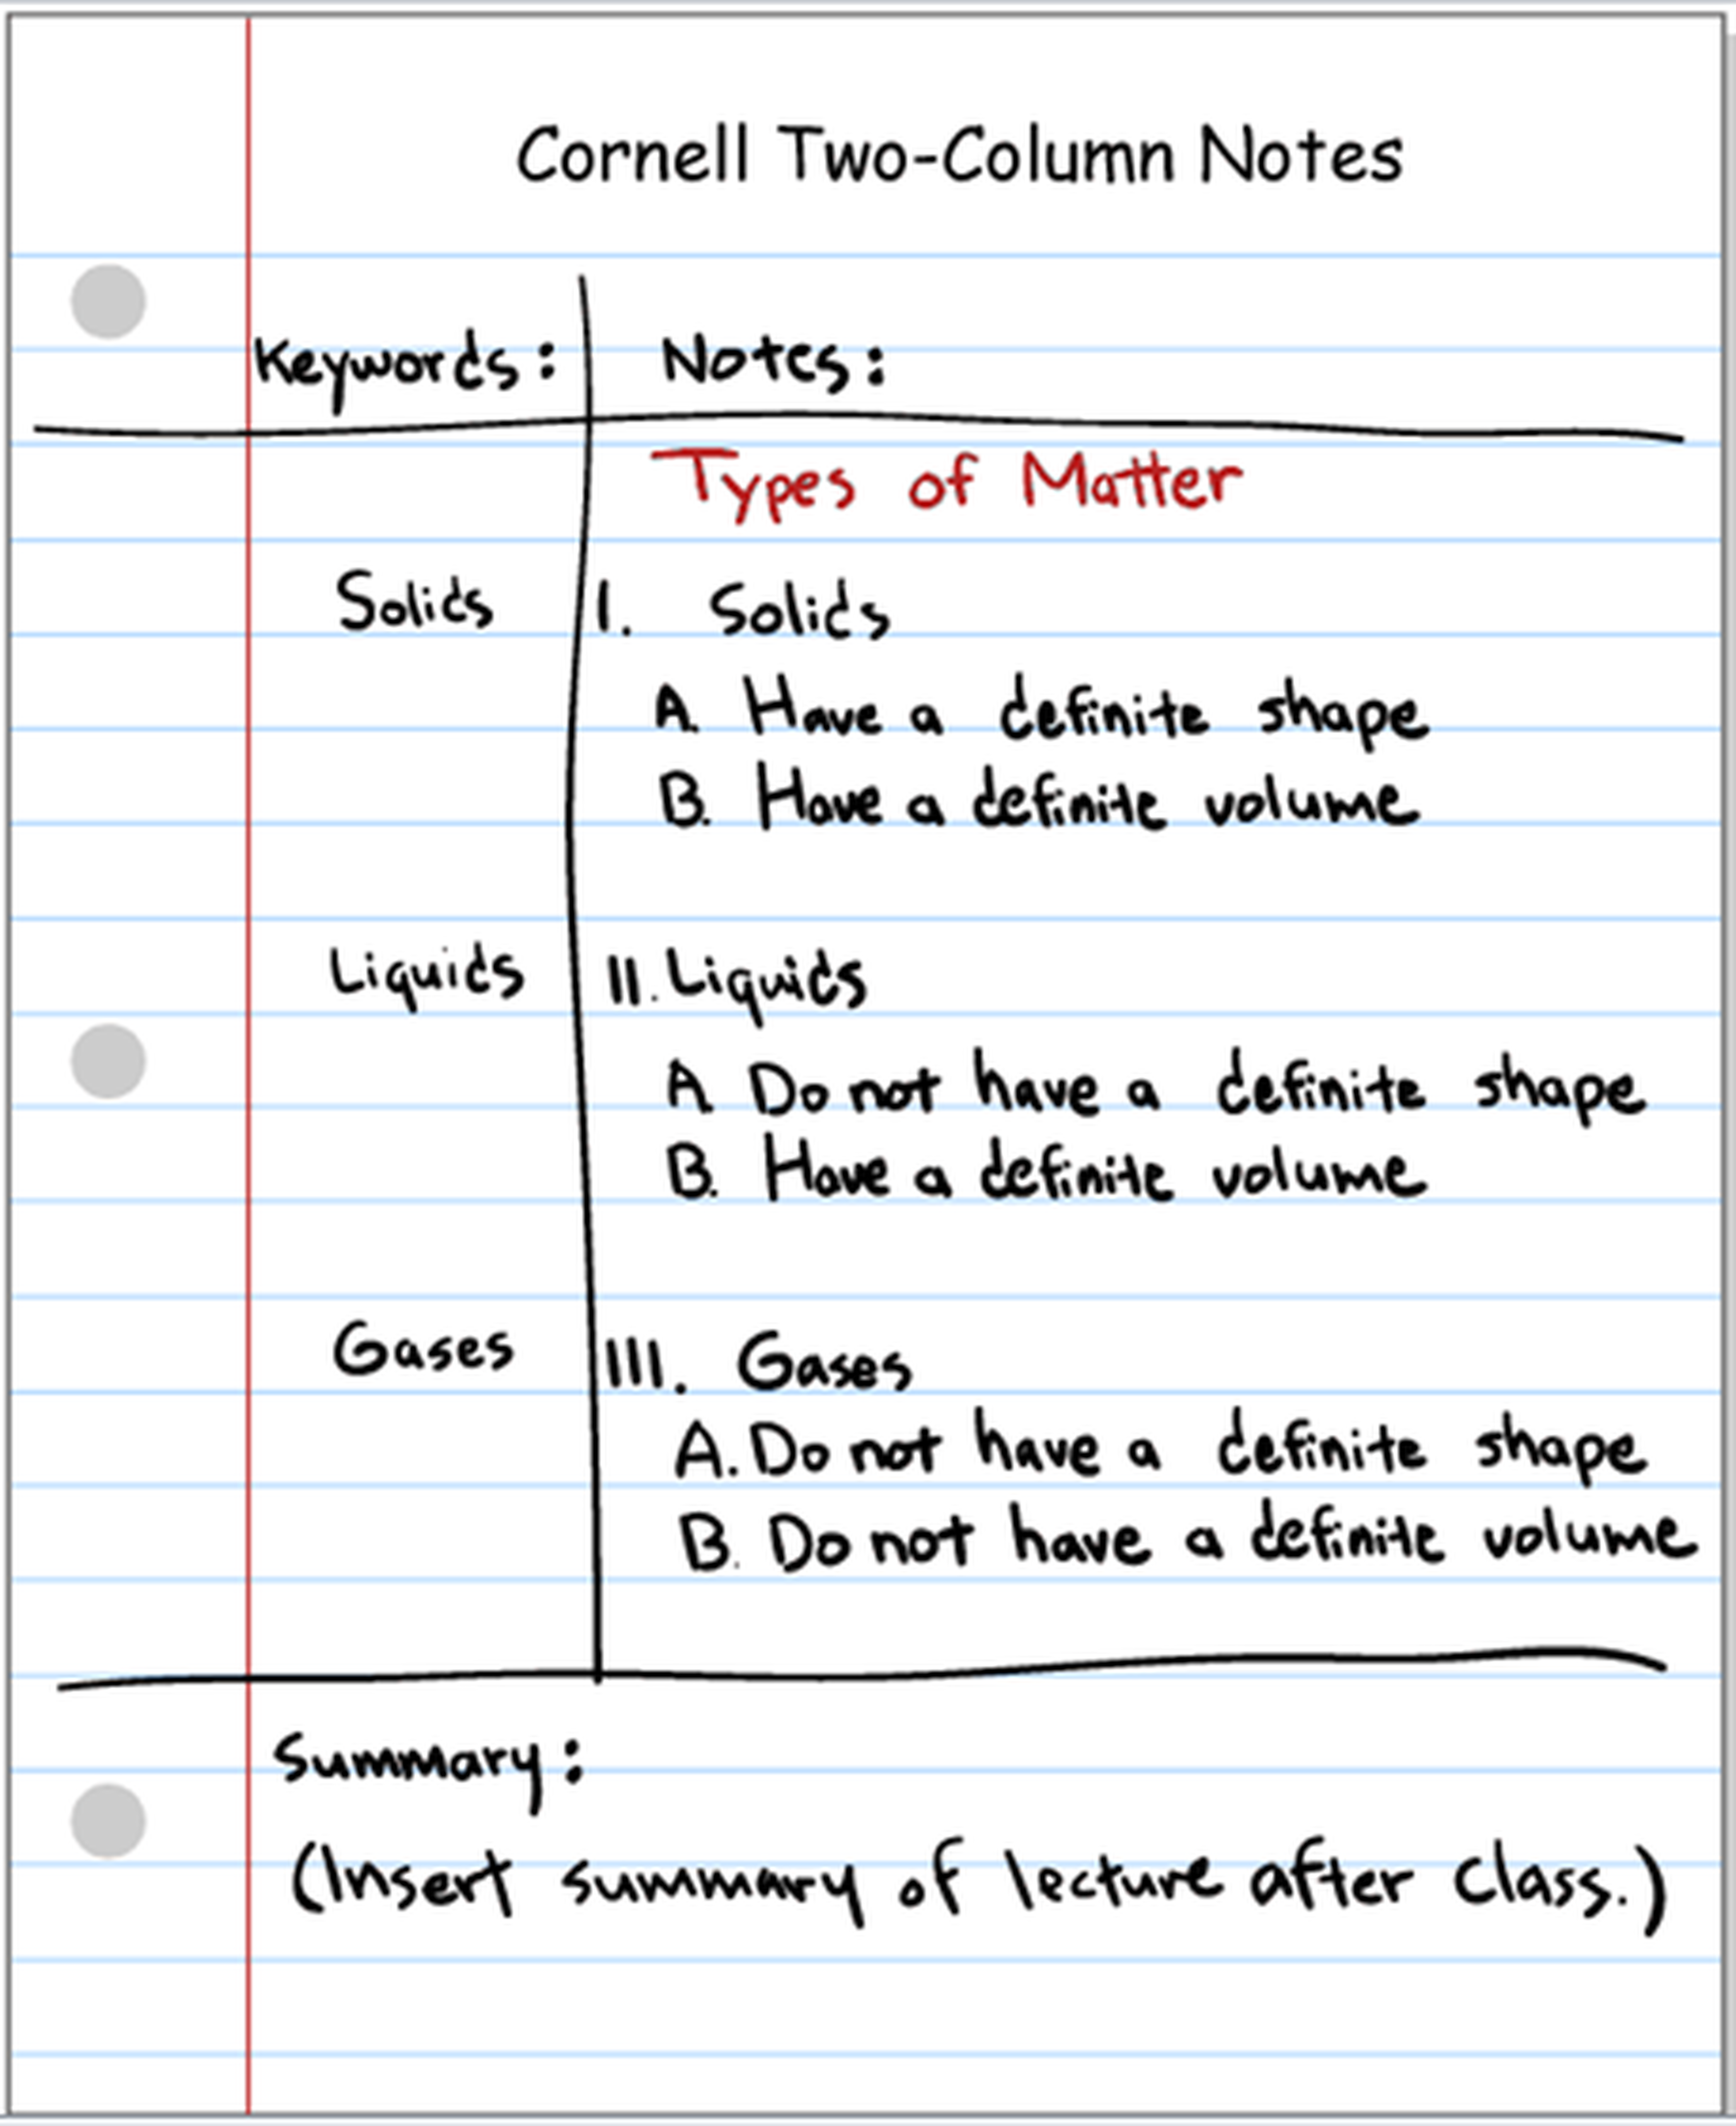 examples-of-cornell-notes-mvca-earth-science